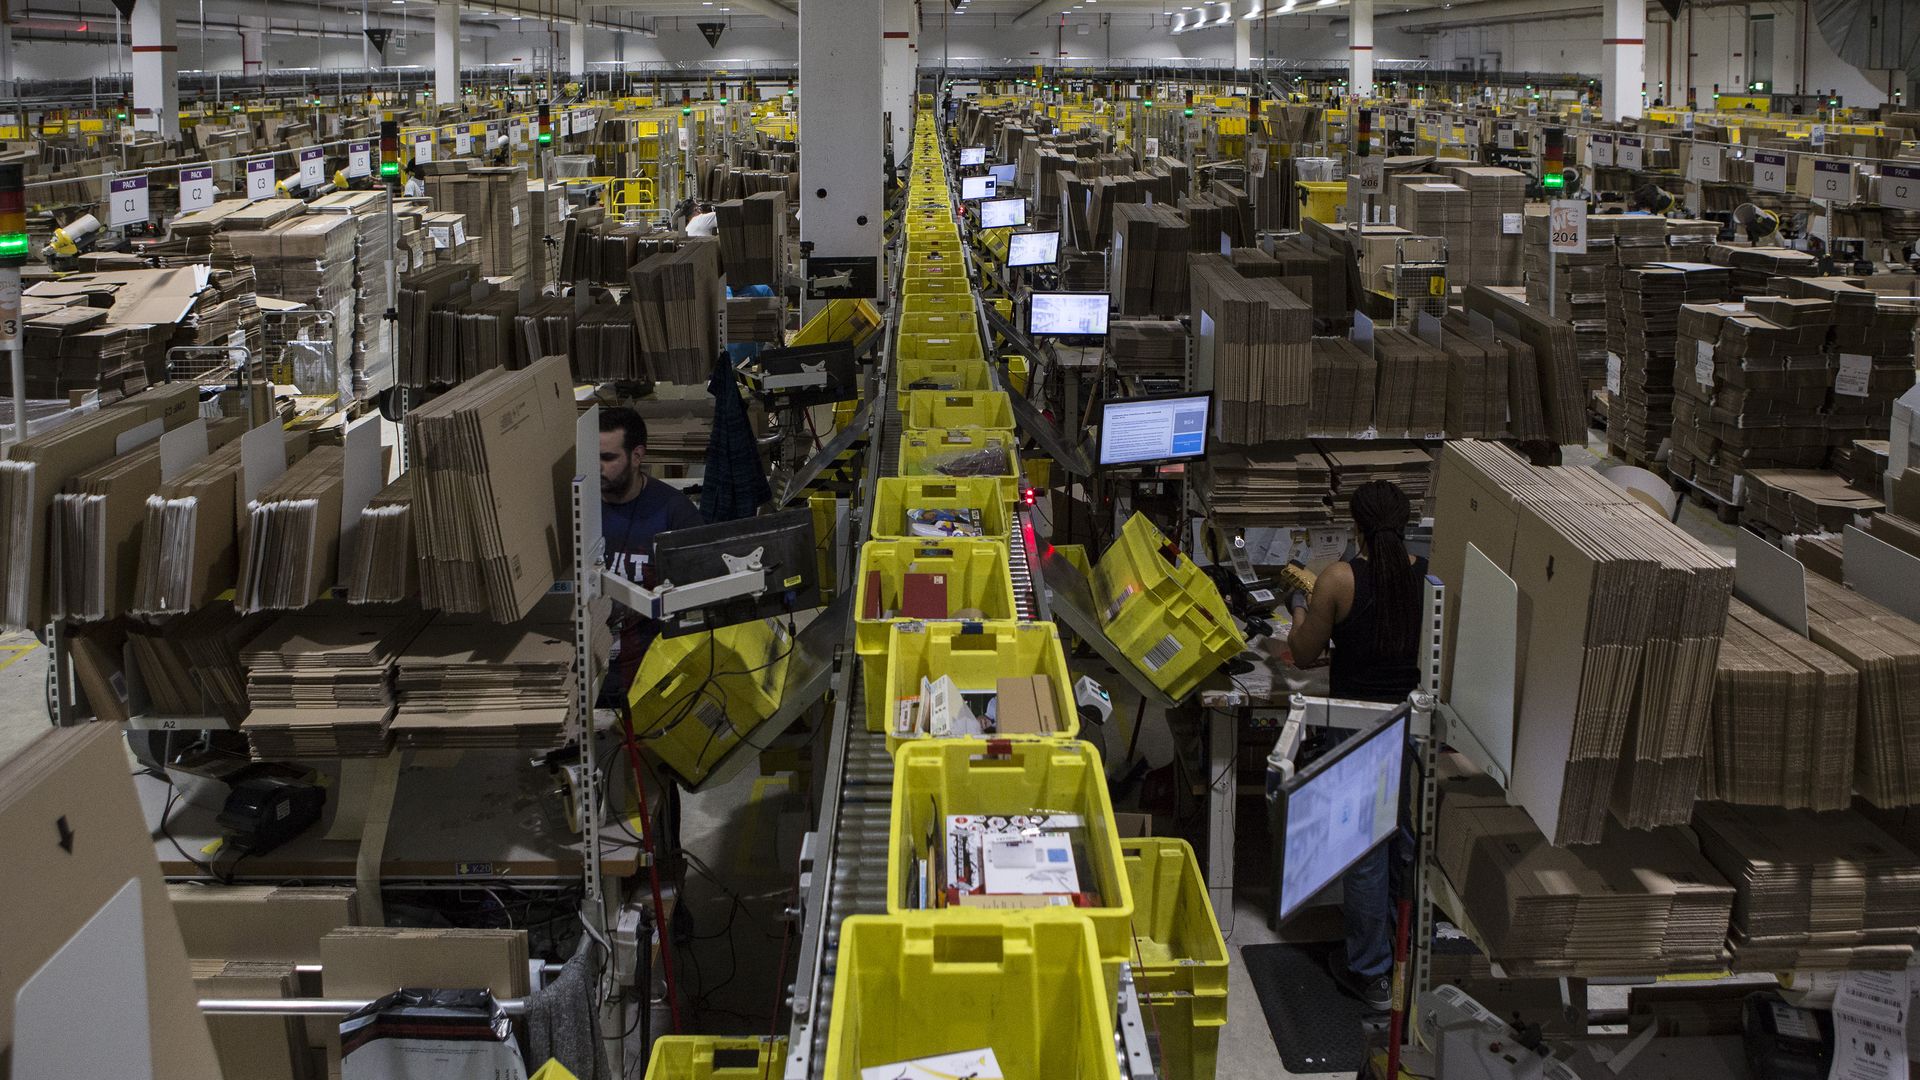 An assembly line of boxes in a warehouse